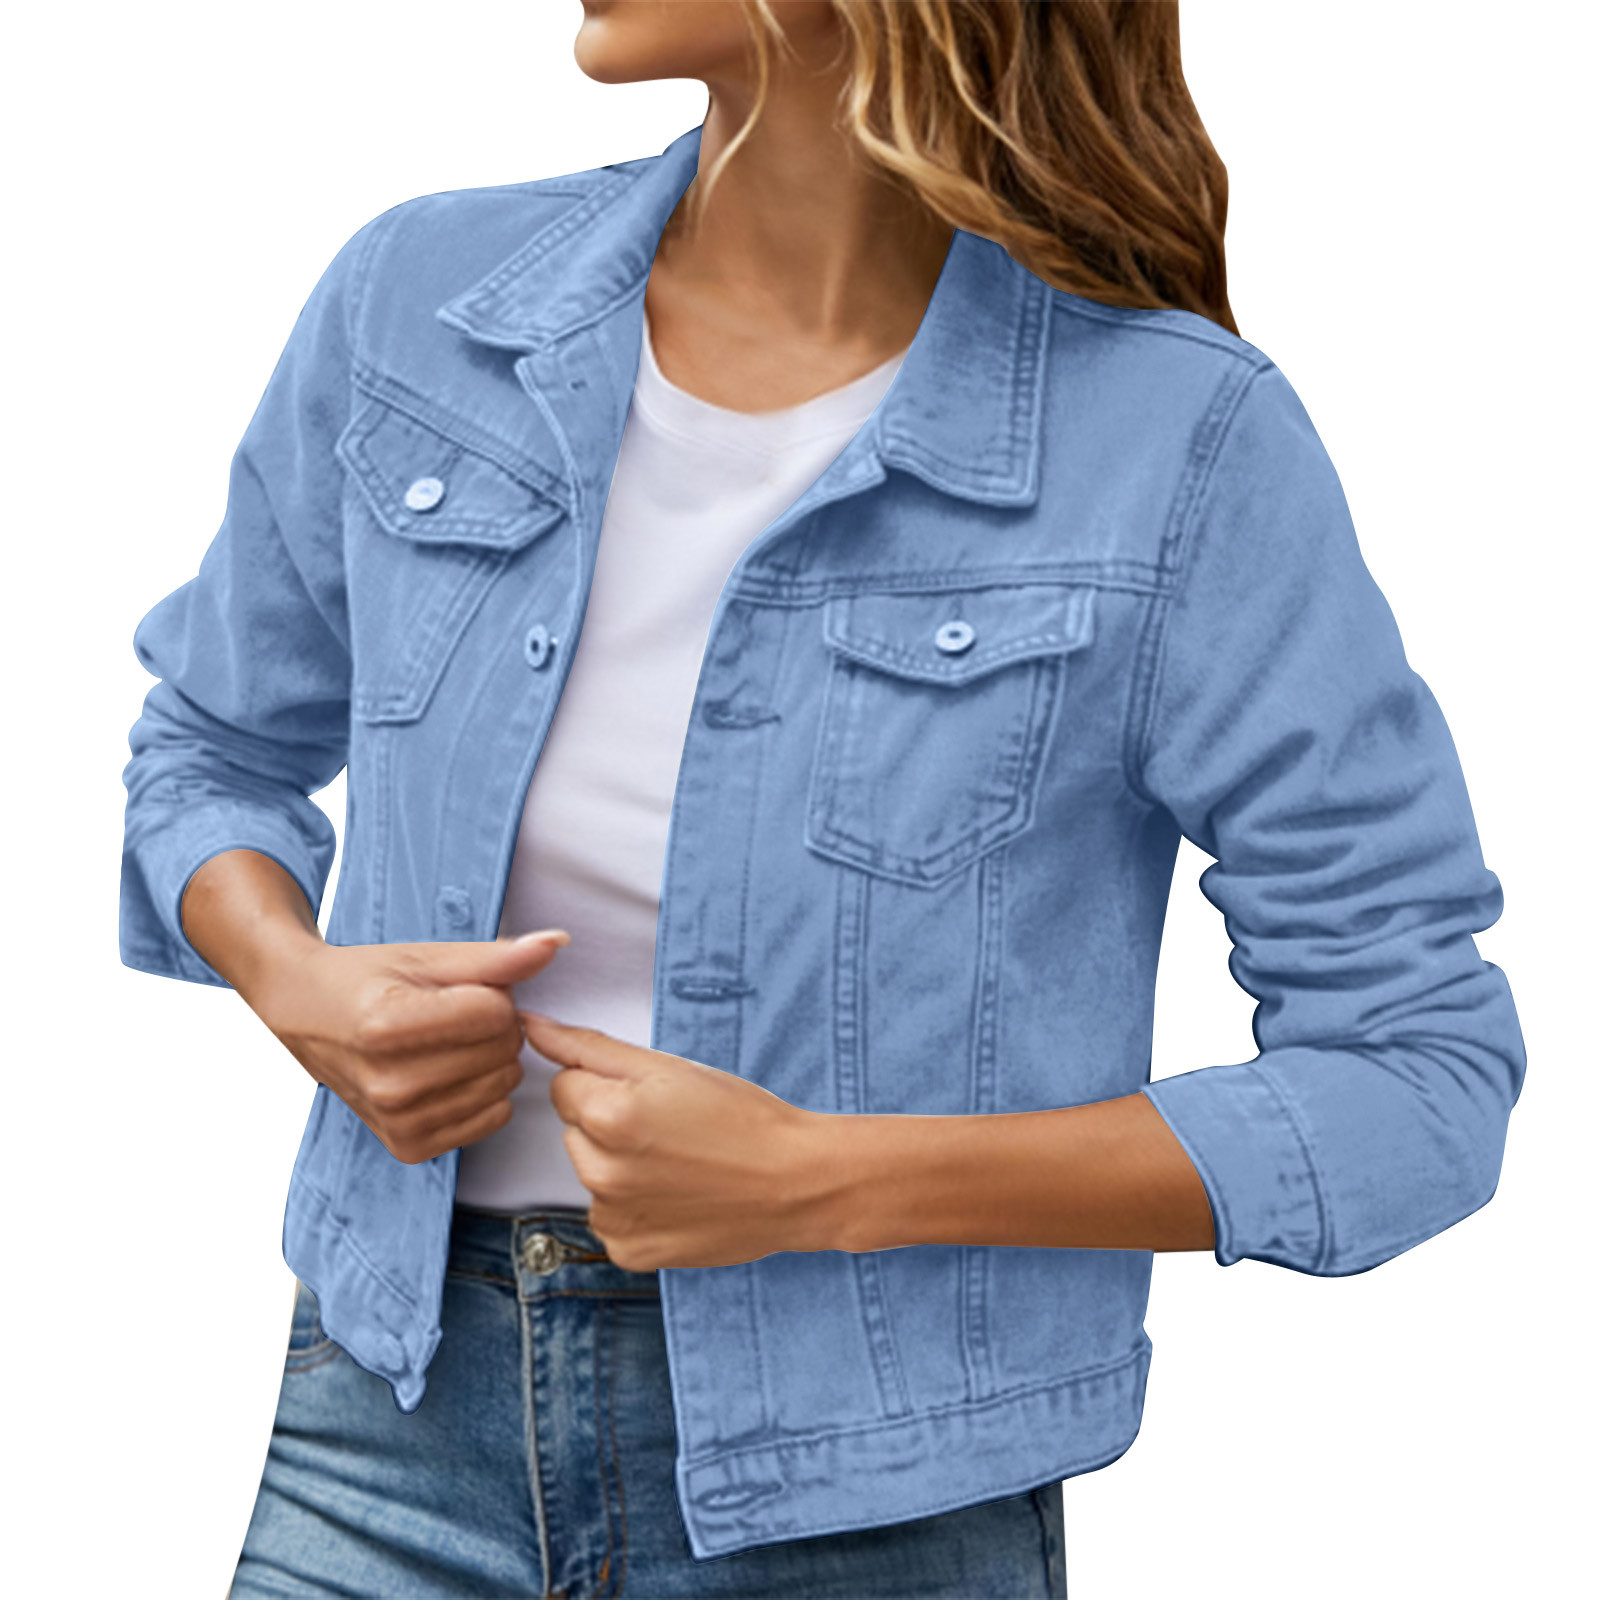 iOPQO womens sweaters Women's Basic Solid Color Button Down Denim Cotton Jacket With Pockets Denim Jacket Coat Women's Denim Jackets Blue XL - image 3 of 8